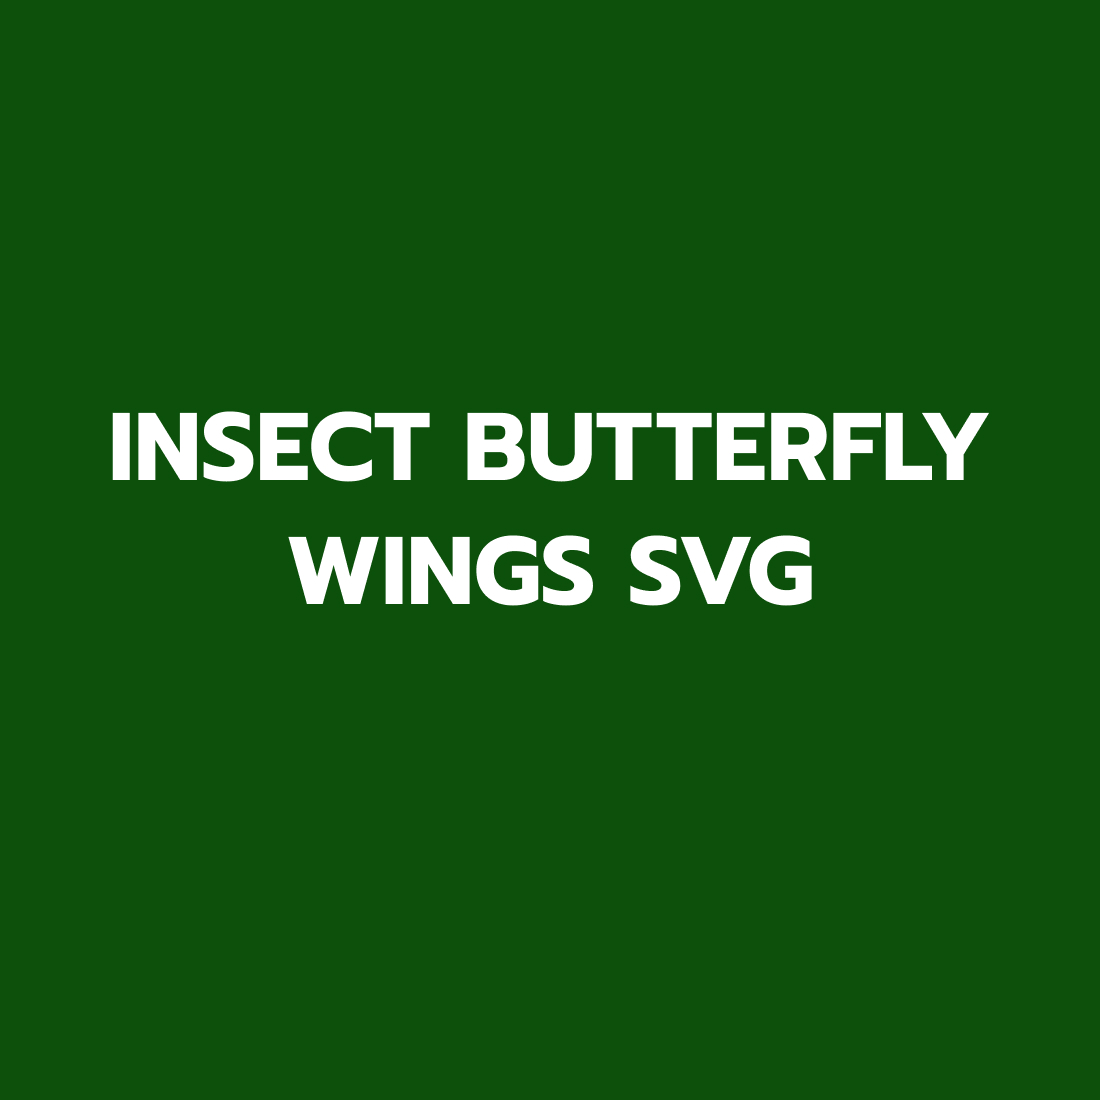 Insect Butterfly Wings SVG preview.